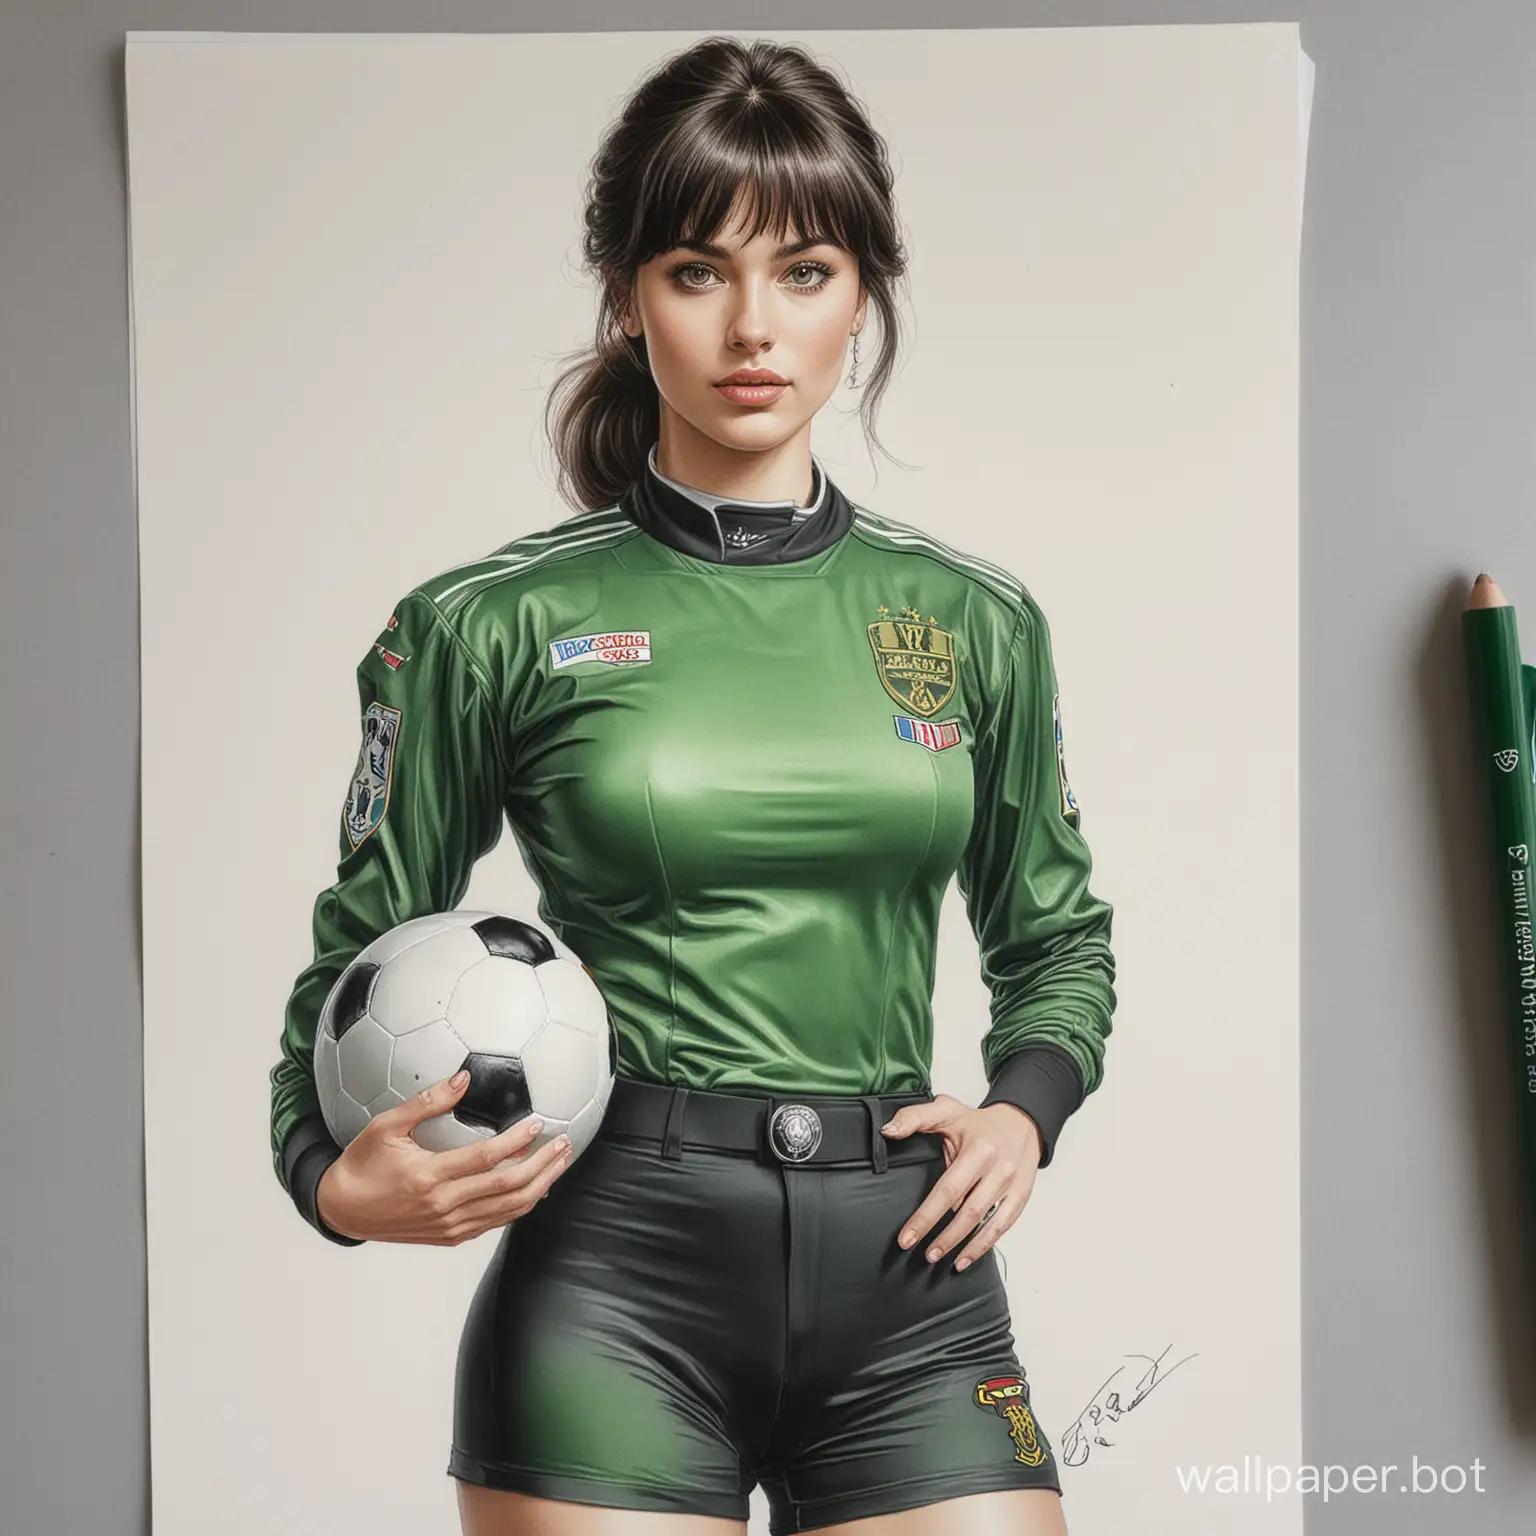 Young-Olga-Von-Beisburg-Football-Champion-with-Cup-Realistic-Drawing